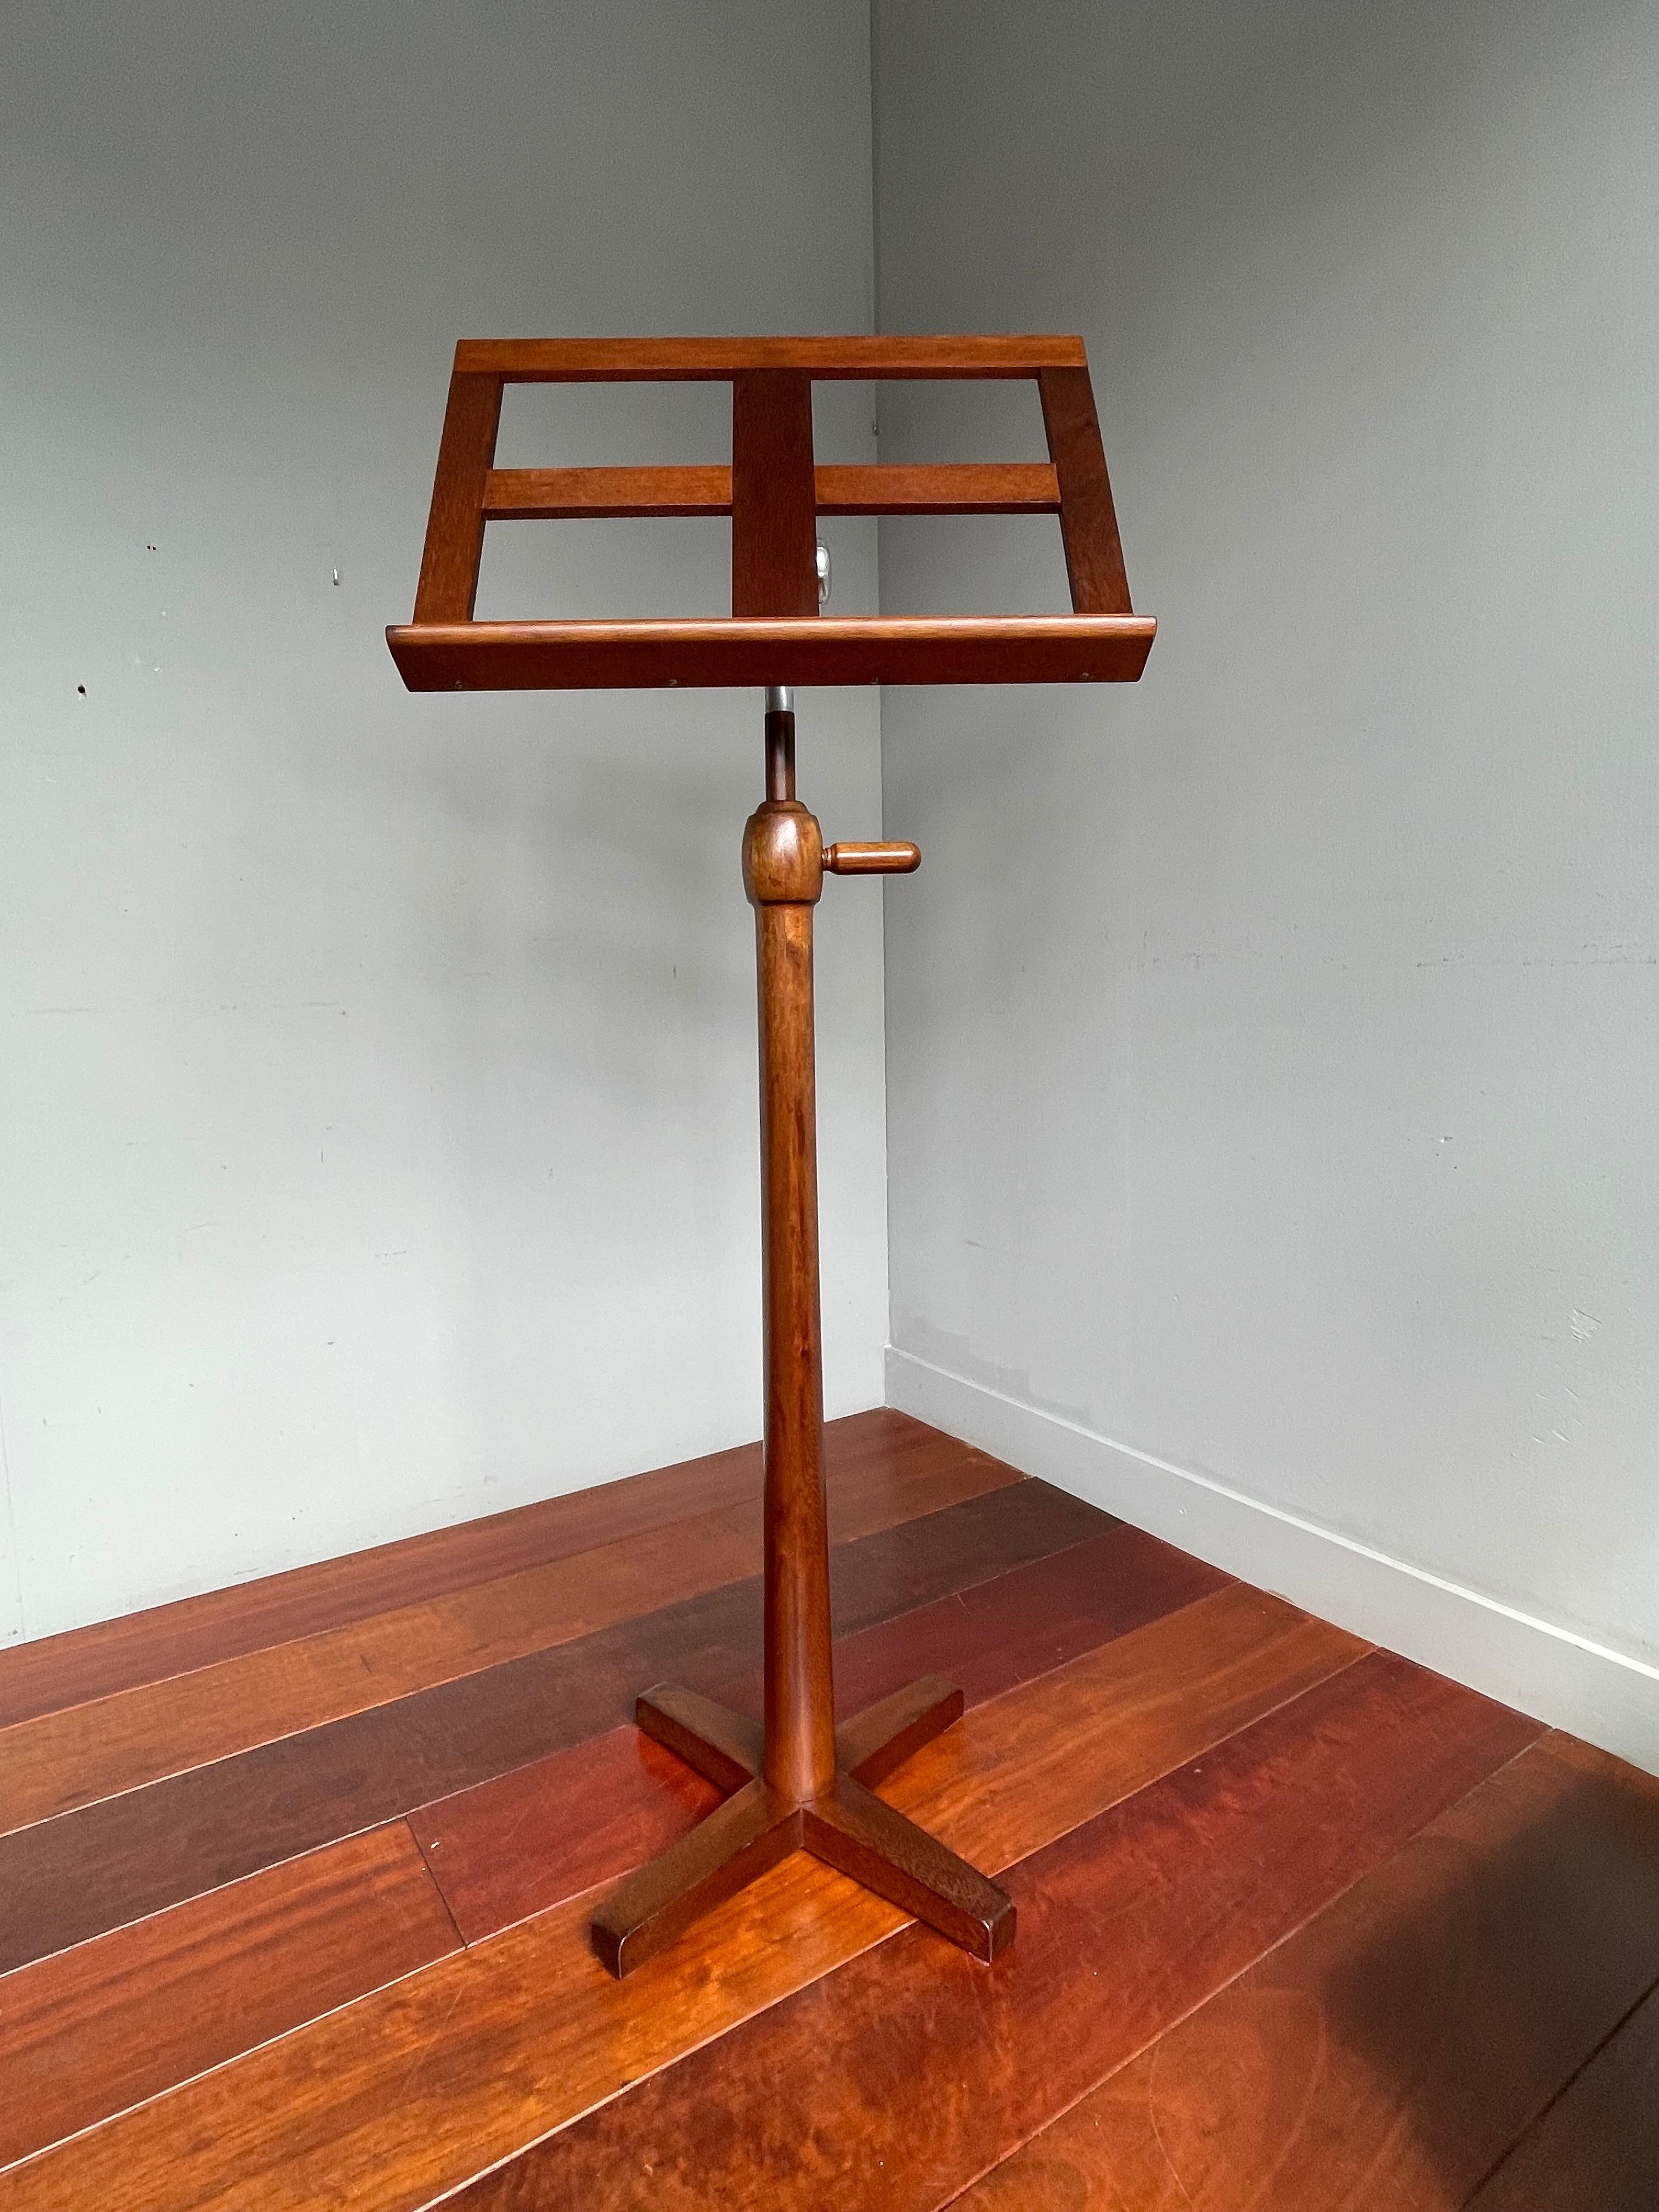 Rare design, solid wooden, adjustable stand for music paper, Germany 1962.

Music stands from the midcentury era are very difficult to find and to have found a one of a kind specimen from 1962 (in this amazing condition) again felt like a blessing.